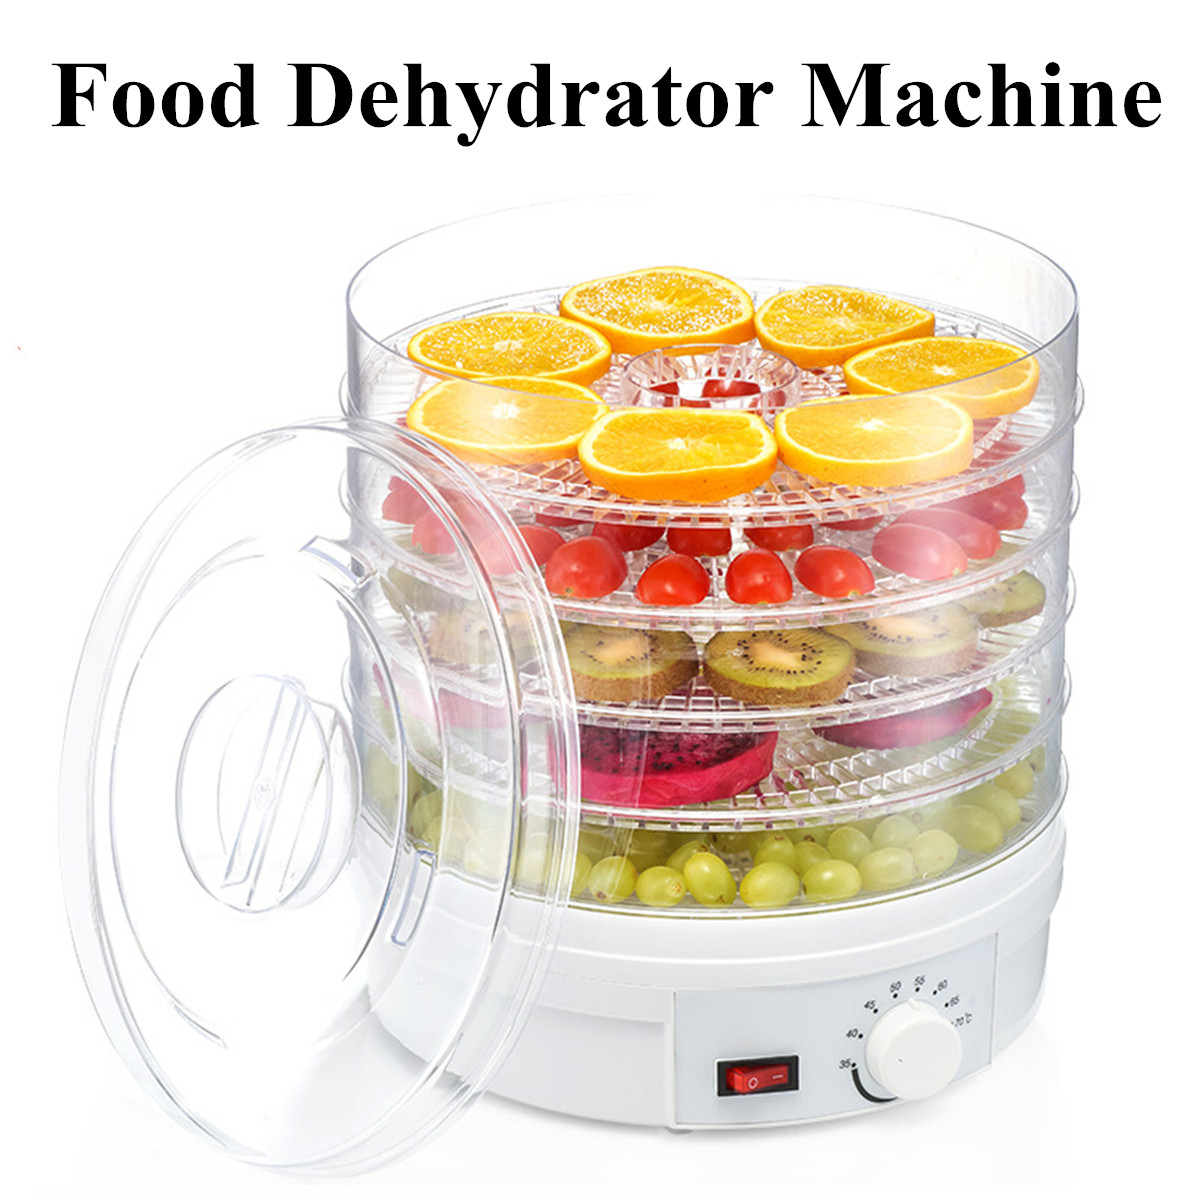 110V 350W 5 Trays Food Vegetable Dehydrator Fruit Meat Dryer Drying Machine 16